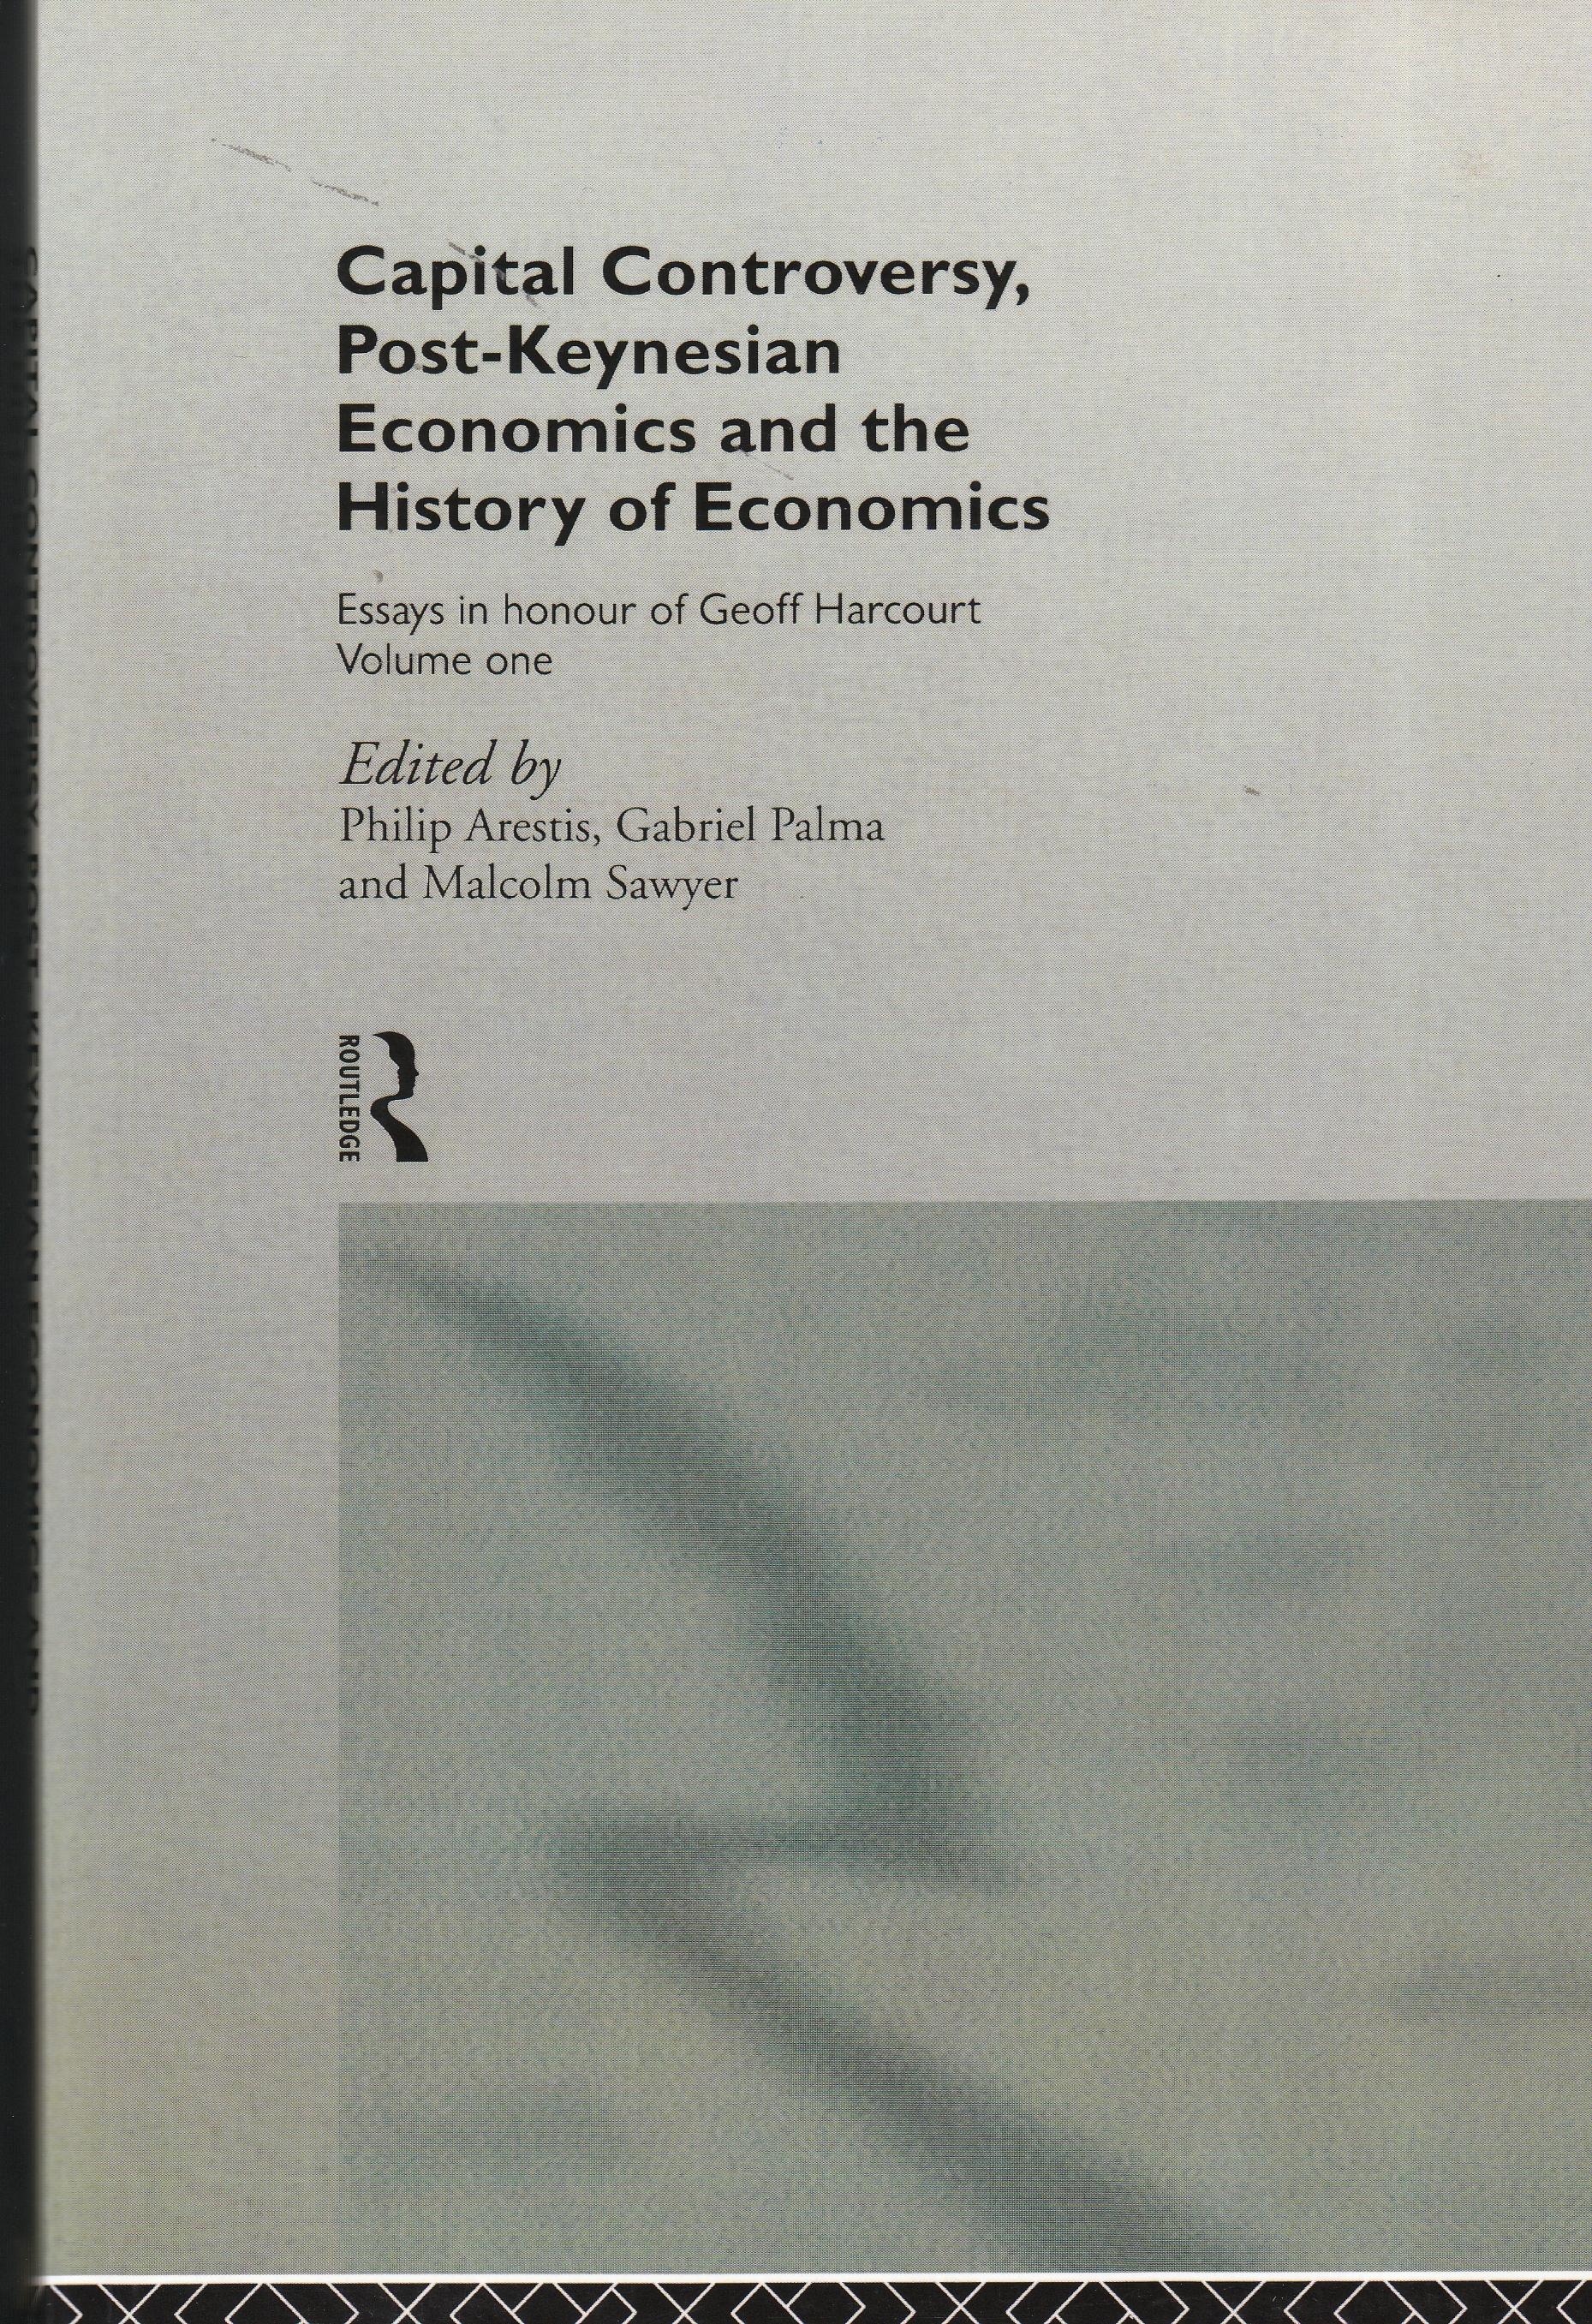 Capital Controversy, Post Keynesian Economics and the History of Economic "Essays in Honour of Geoff Harcourt, Volume One"